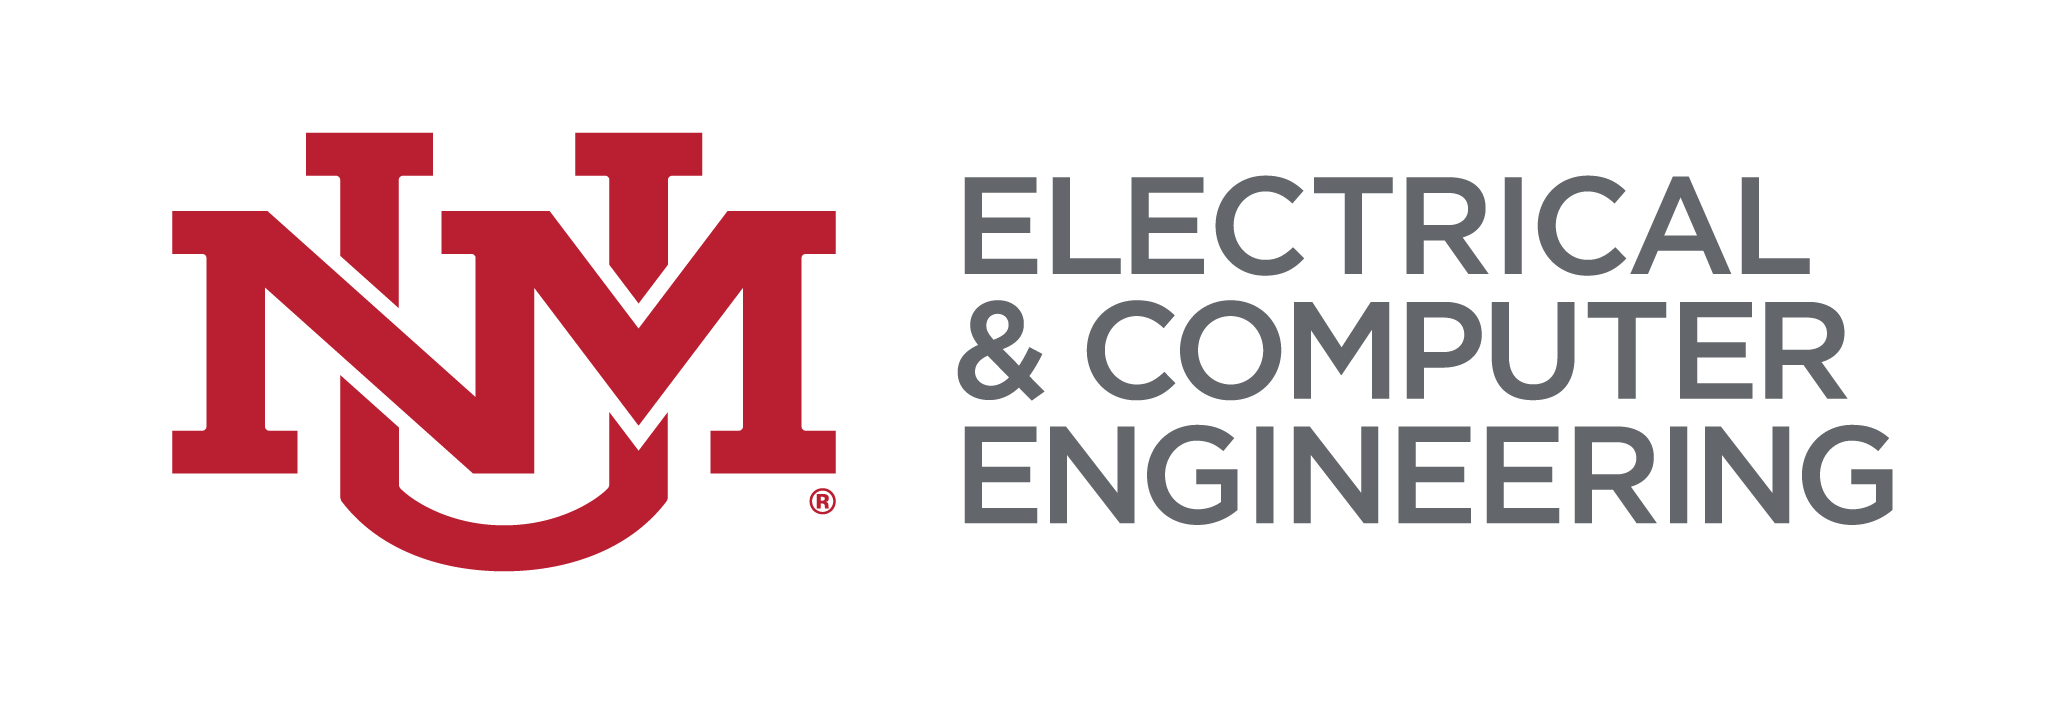 Electrical & Computer Engineering